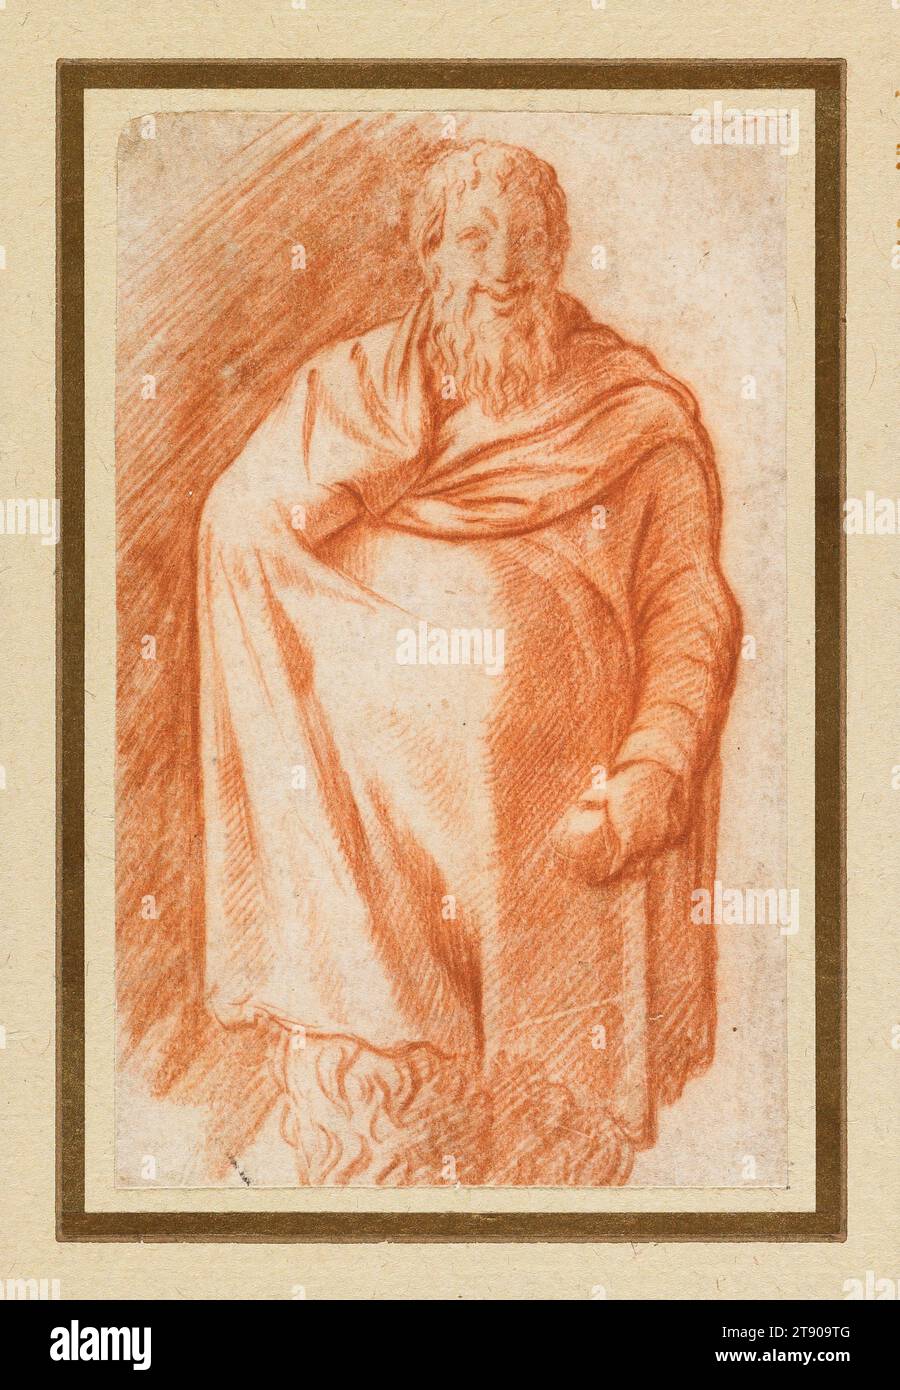 Study of a Statue of Pan, 1520s, Attributed to Polidoro da Caravaggio, Italian, c. 1500-1543, 5 3/4 x 3 9/16 in. (14.61 x 9.05 cm) (sheet)9 7/8 x 7 3/8 in. (25.08 x 18.73 cm) (mount), Red chalk on cream paper, Italy, 16th century Stock Photo